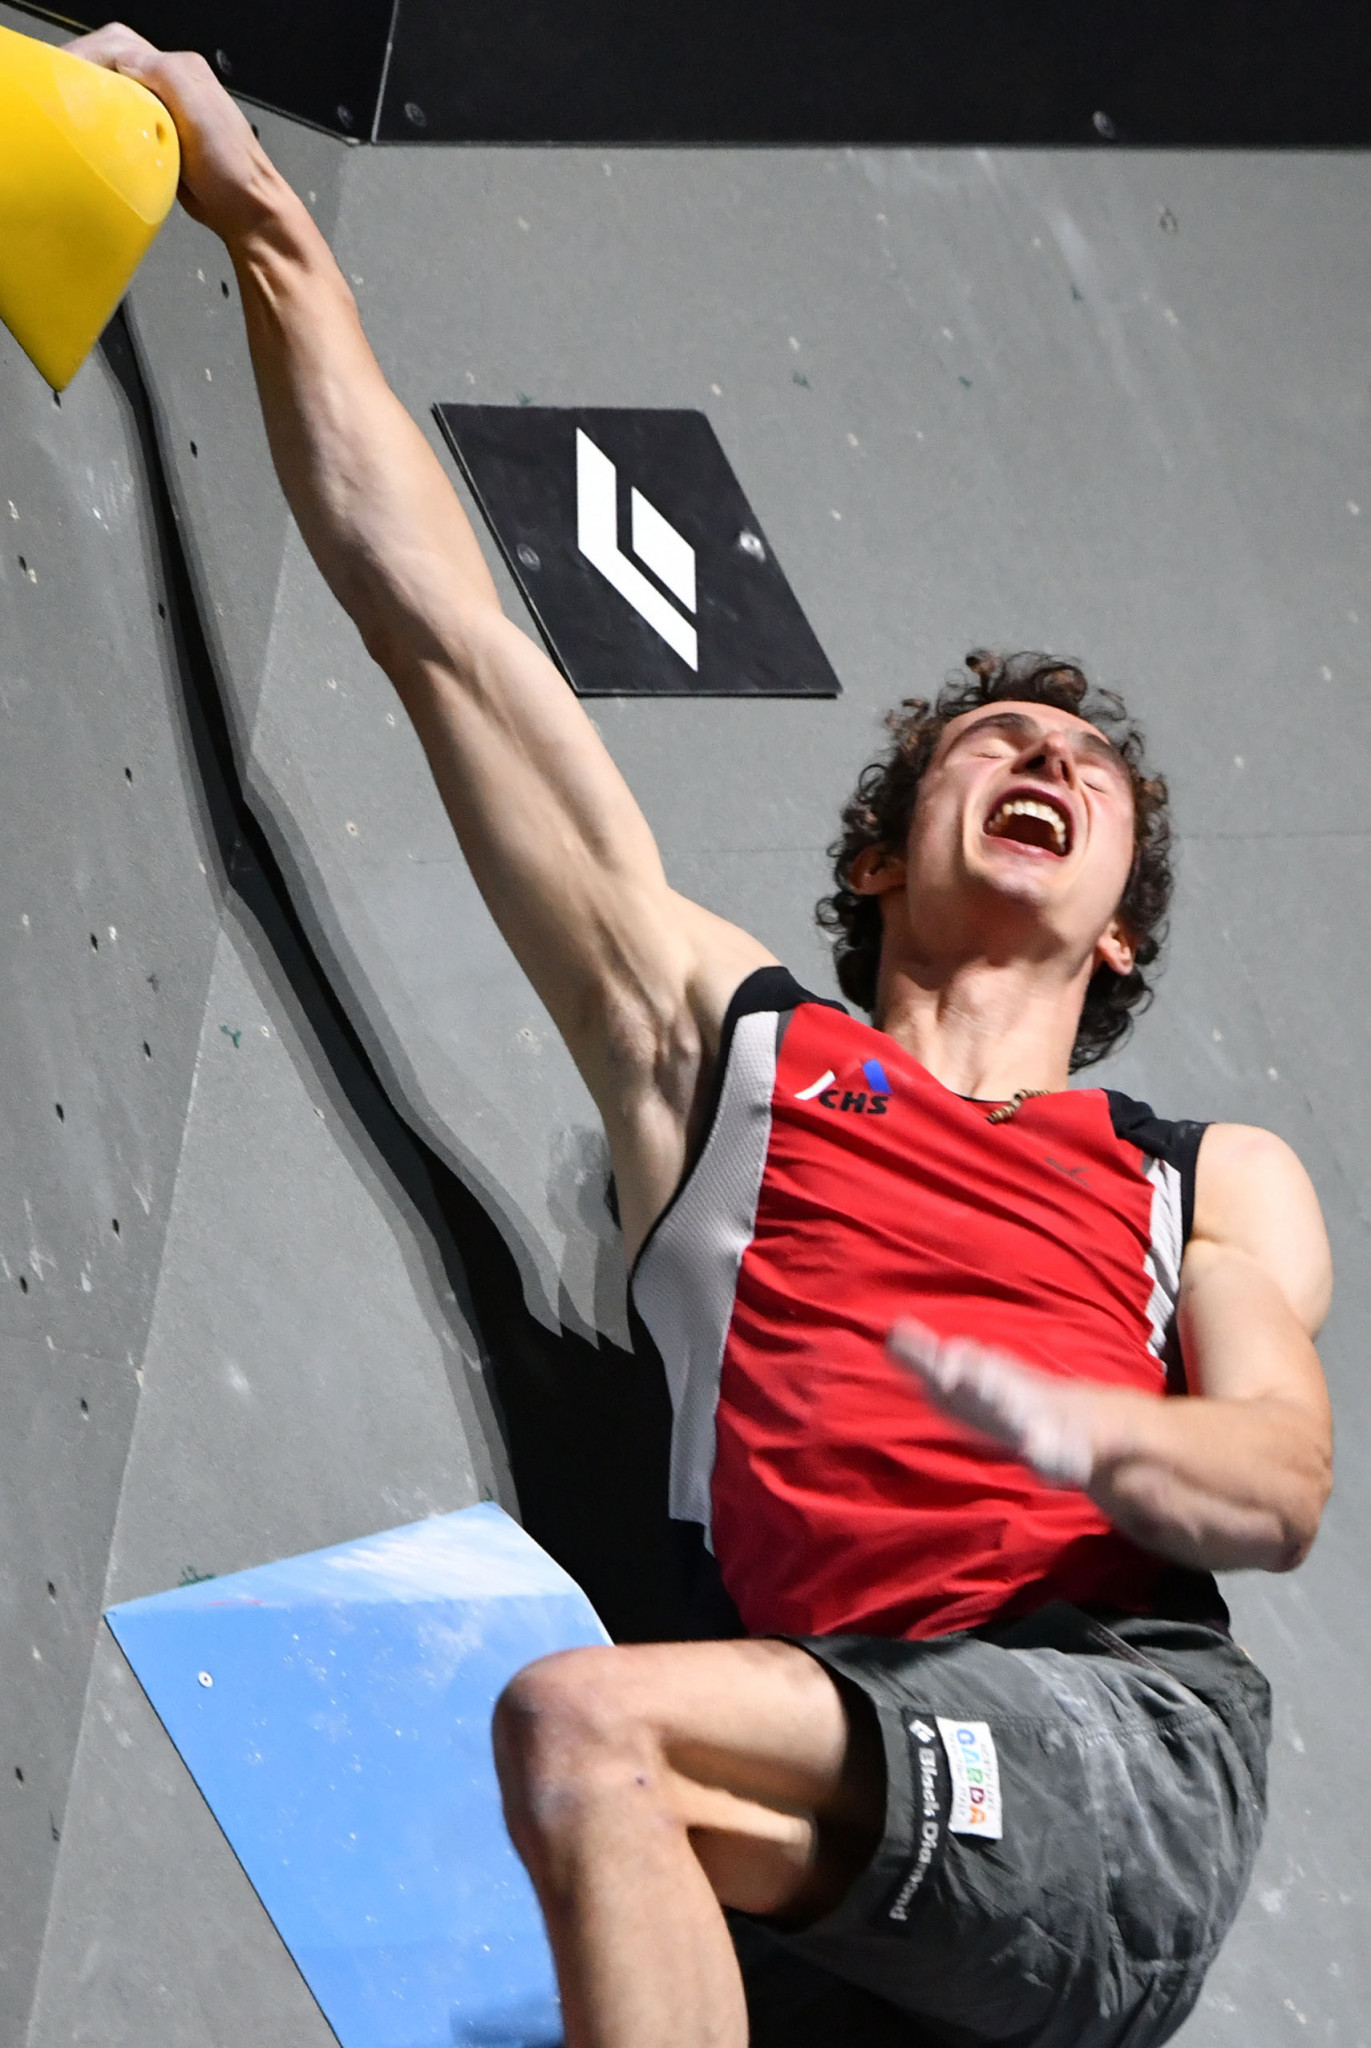 Adam Ondra, the Czech Republic's four-times world champion, faces tough opposition in the bouldering competition at the IFSC World Cup that starts in Chongqing, China tomorrow ©Getty Images